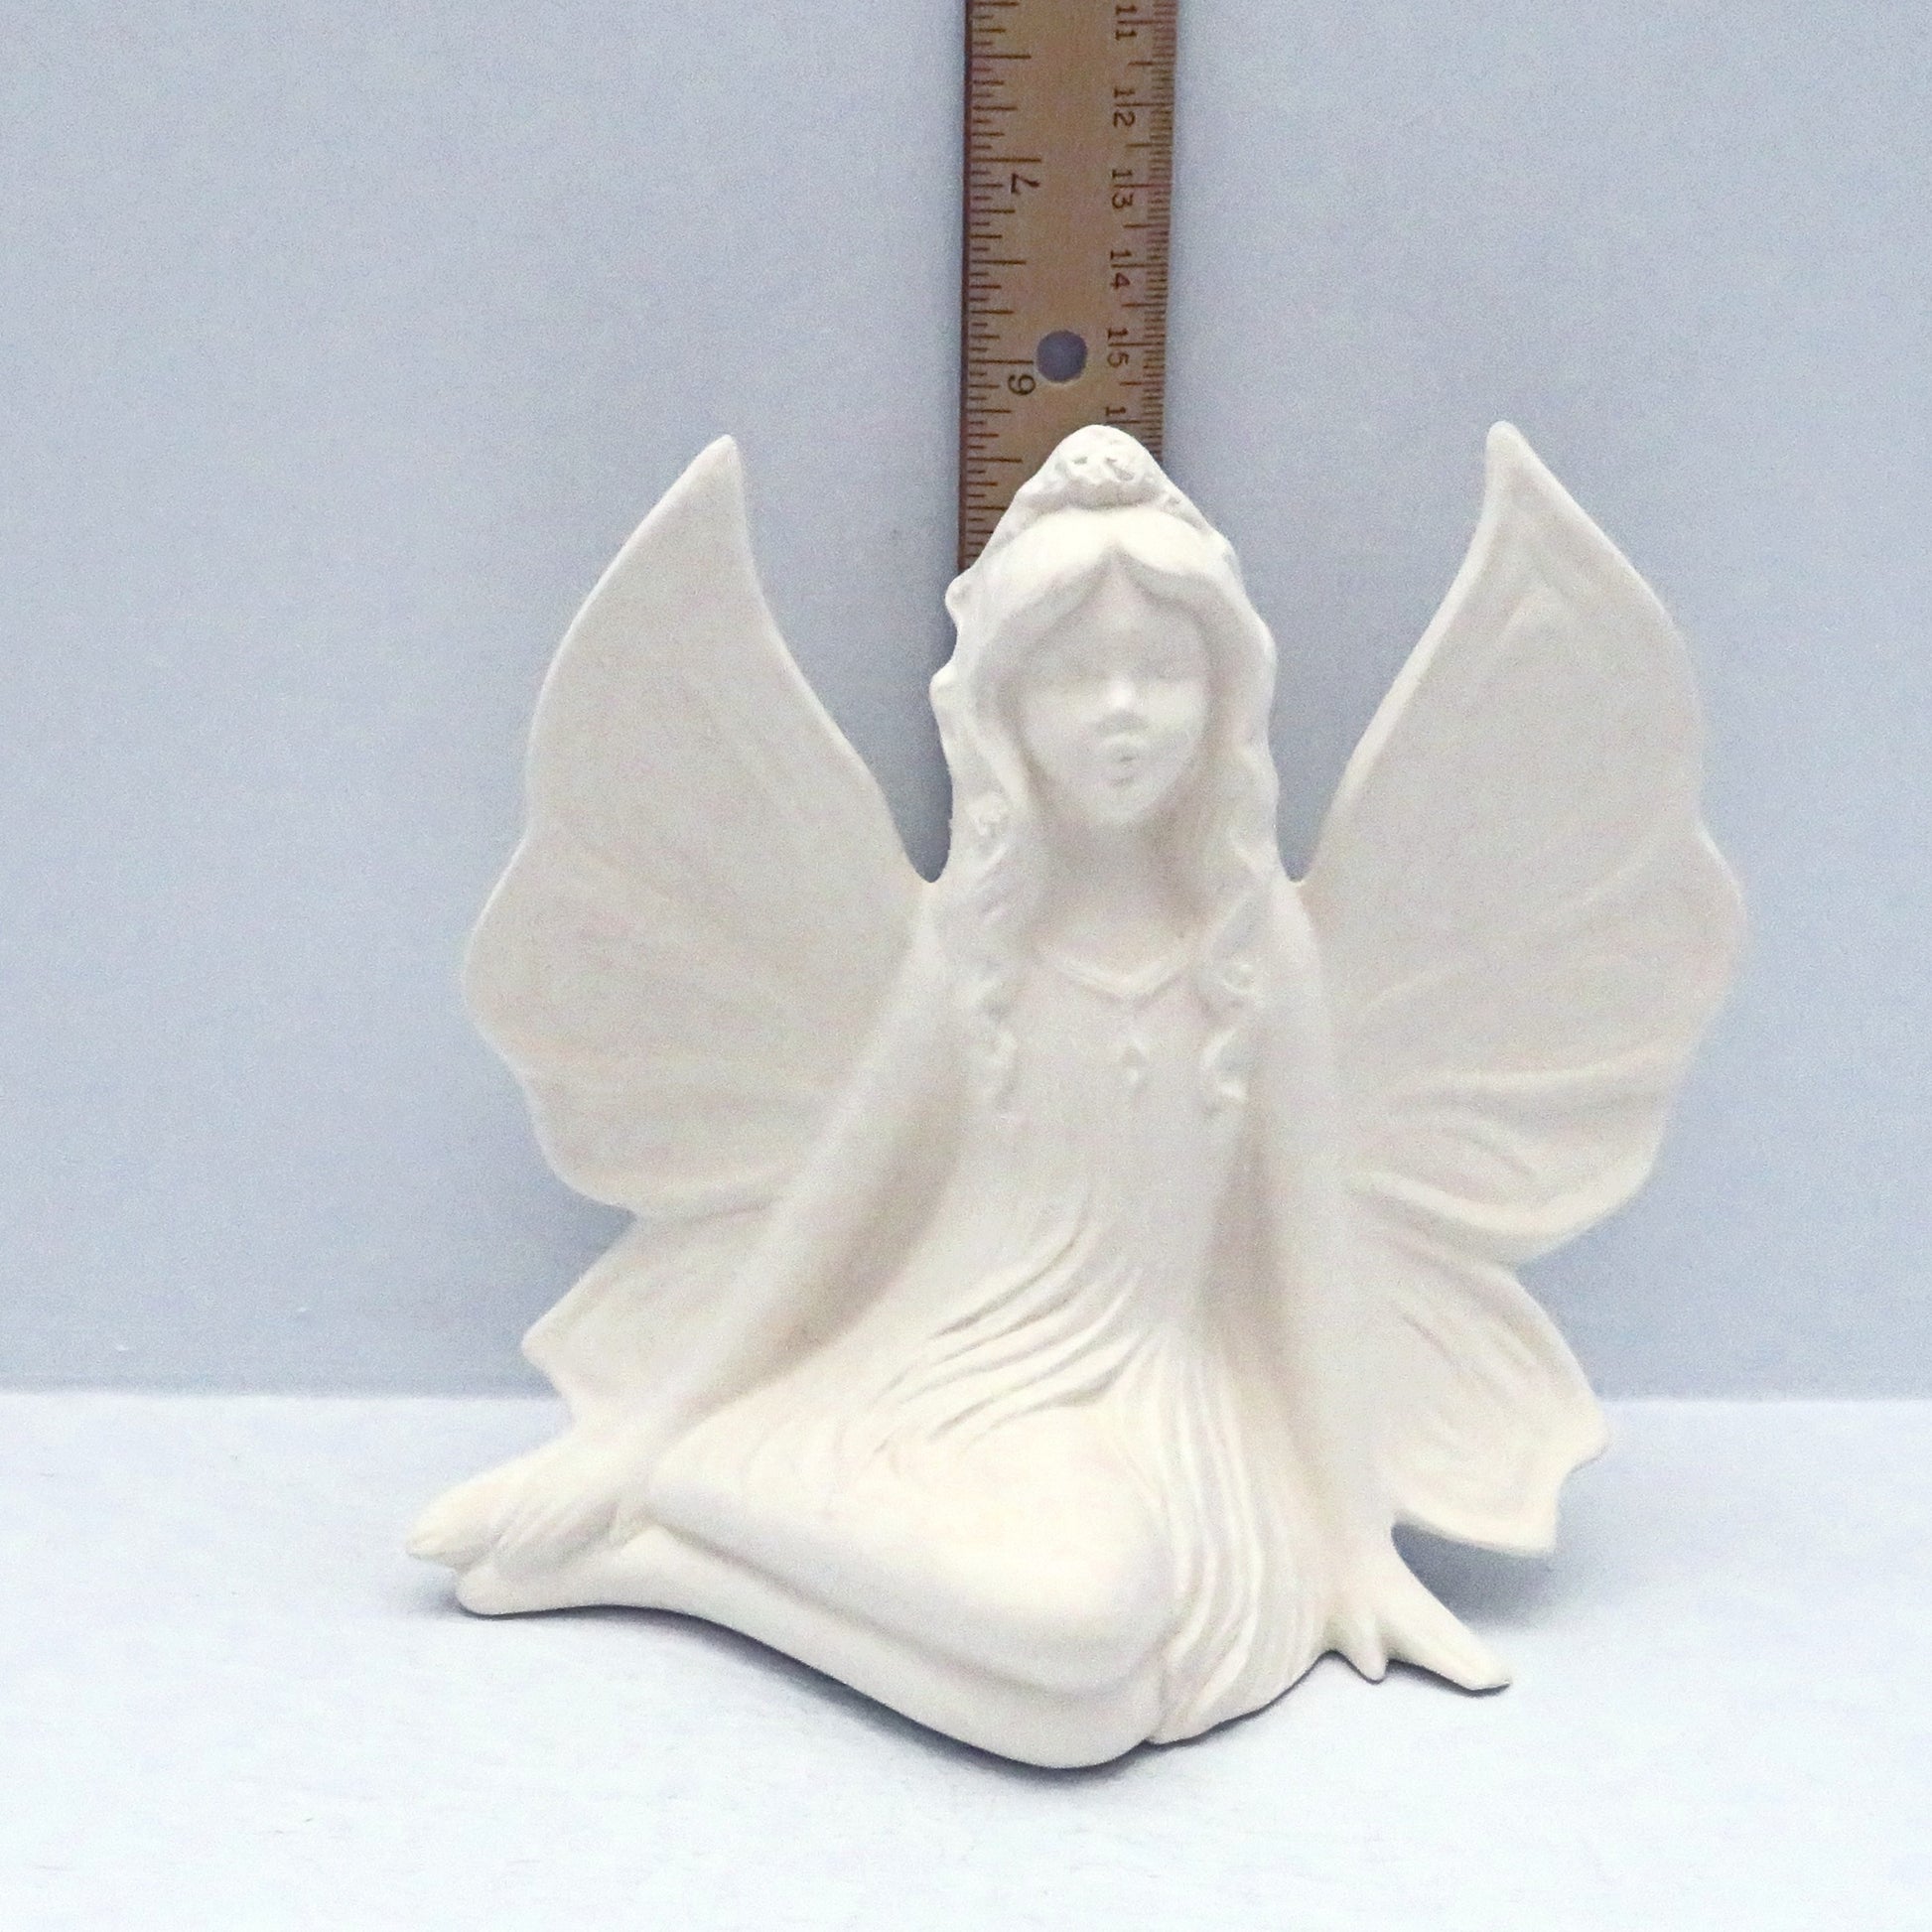 handmade ready to paint ceramic fairy figurine on a blue background with a ruler showing her to be almost 6 inches tall